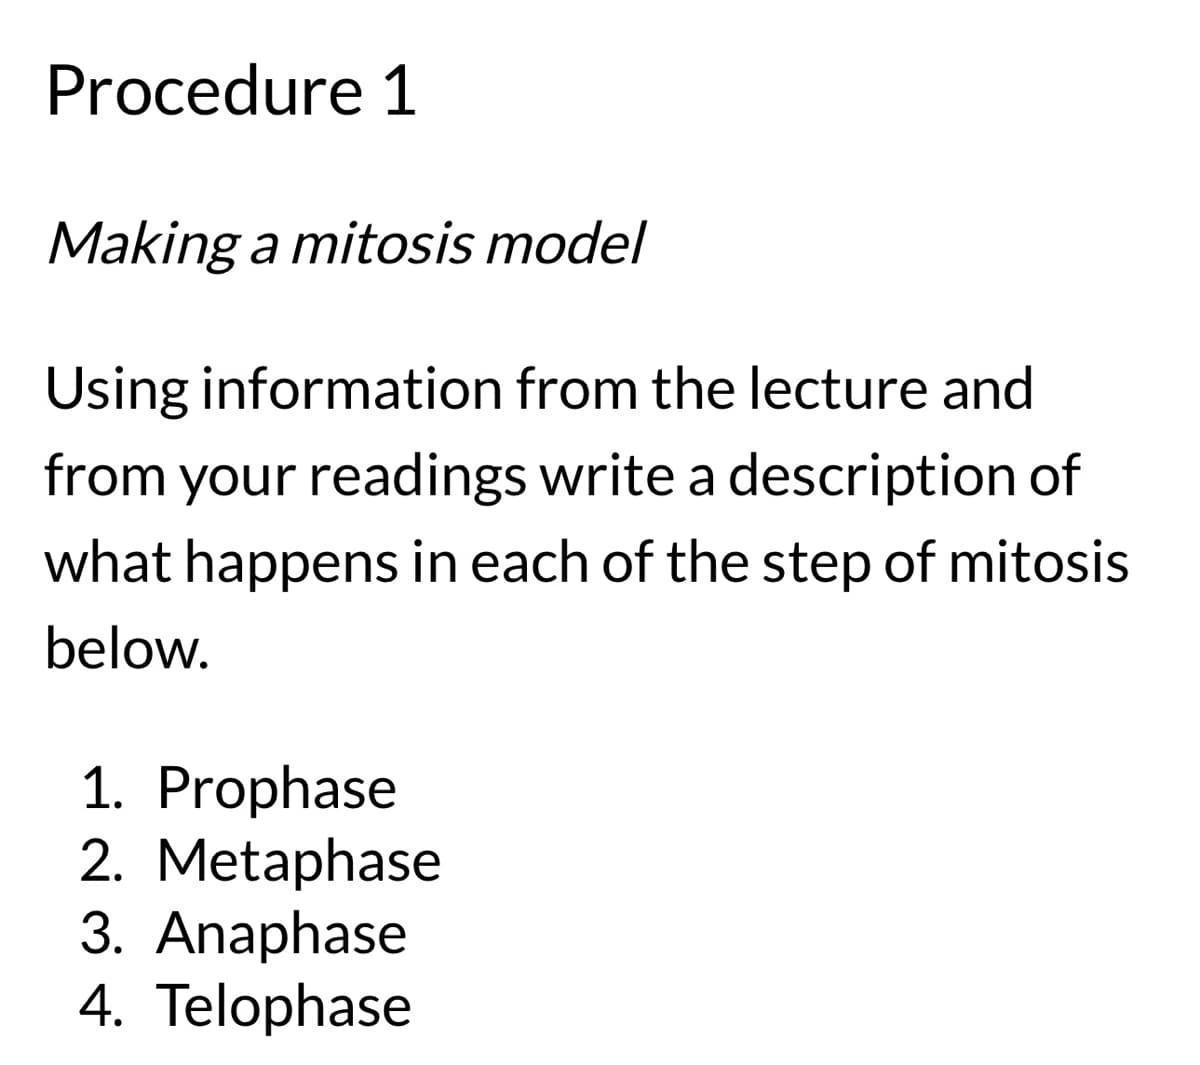 Procedure 1
Making a mitosis model
Using information from the lecture and
from your readings write a description of
what happens in each of the step of mitosis
below.
1. Prophase
2. Metaphase
3. Anaphase
4. Telophase